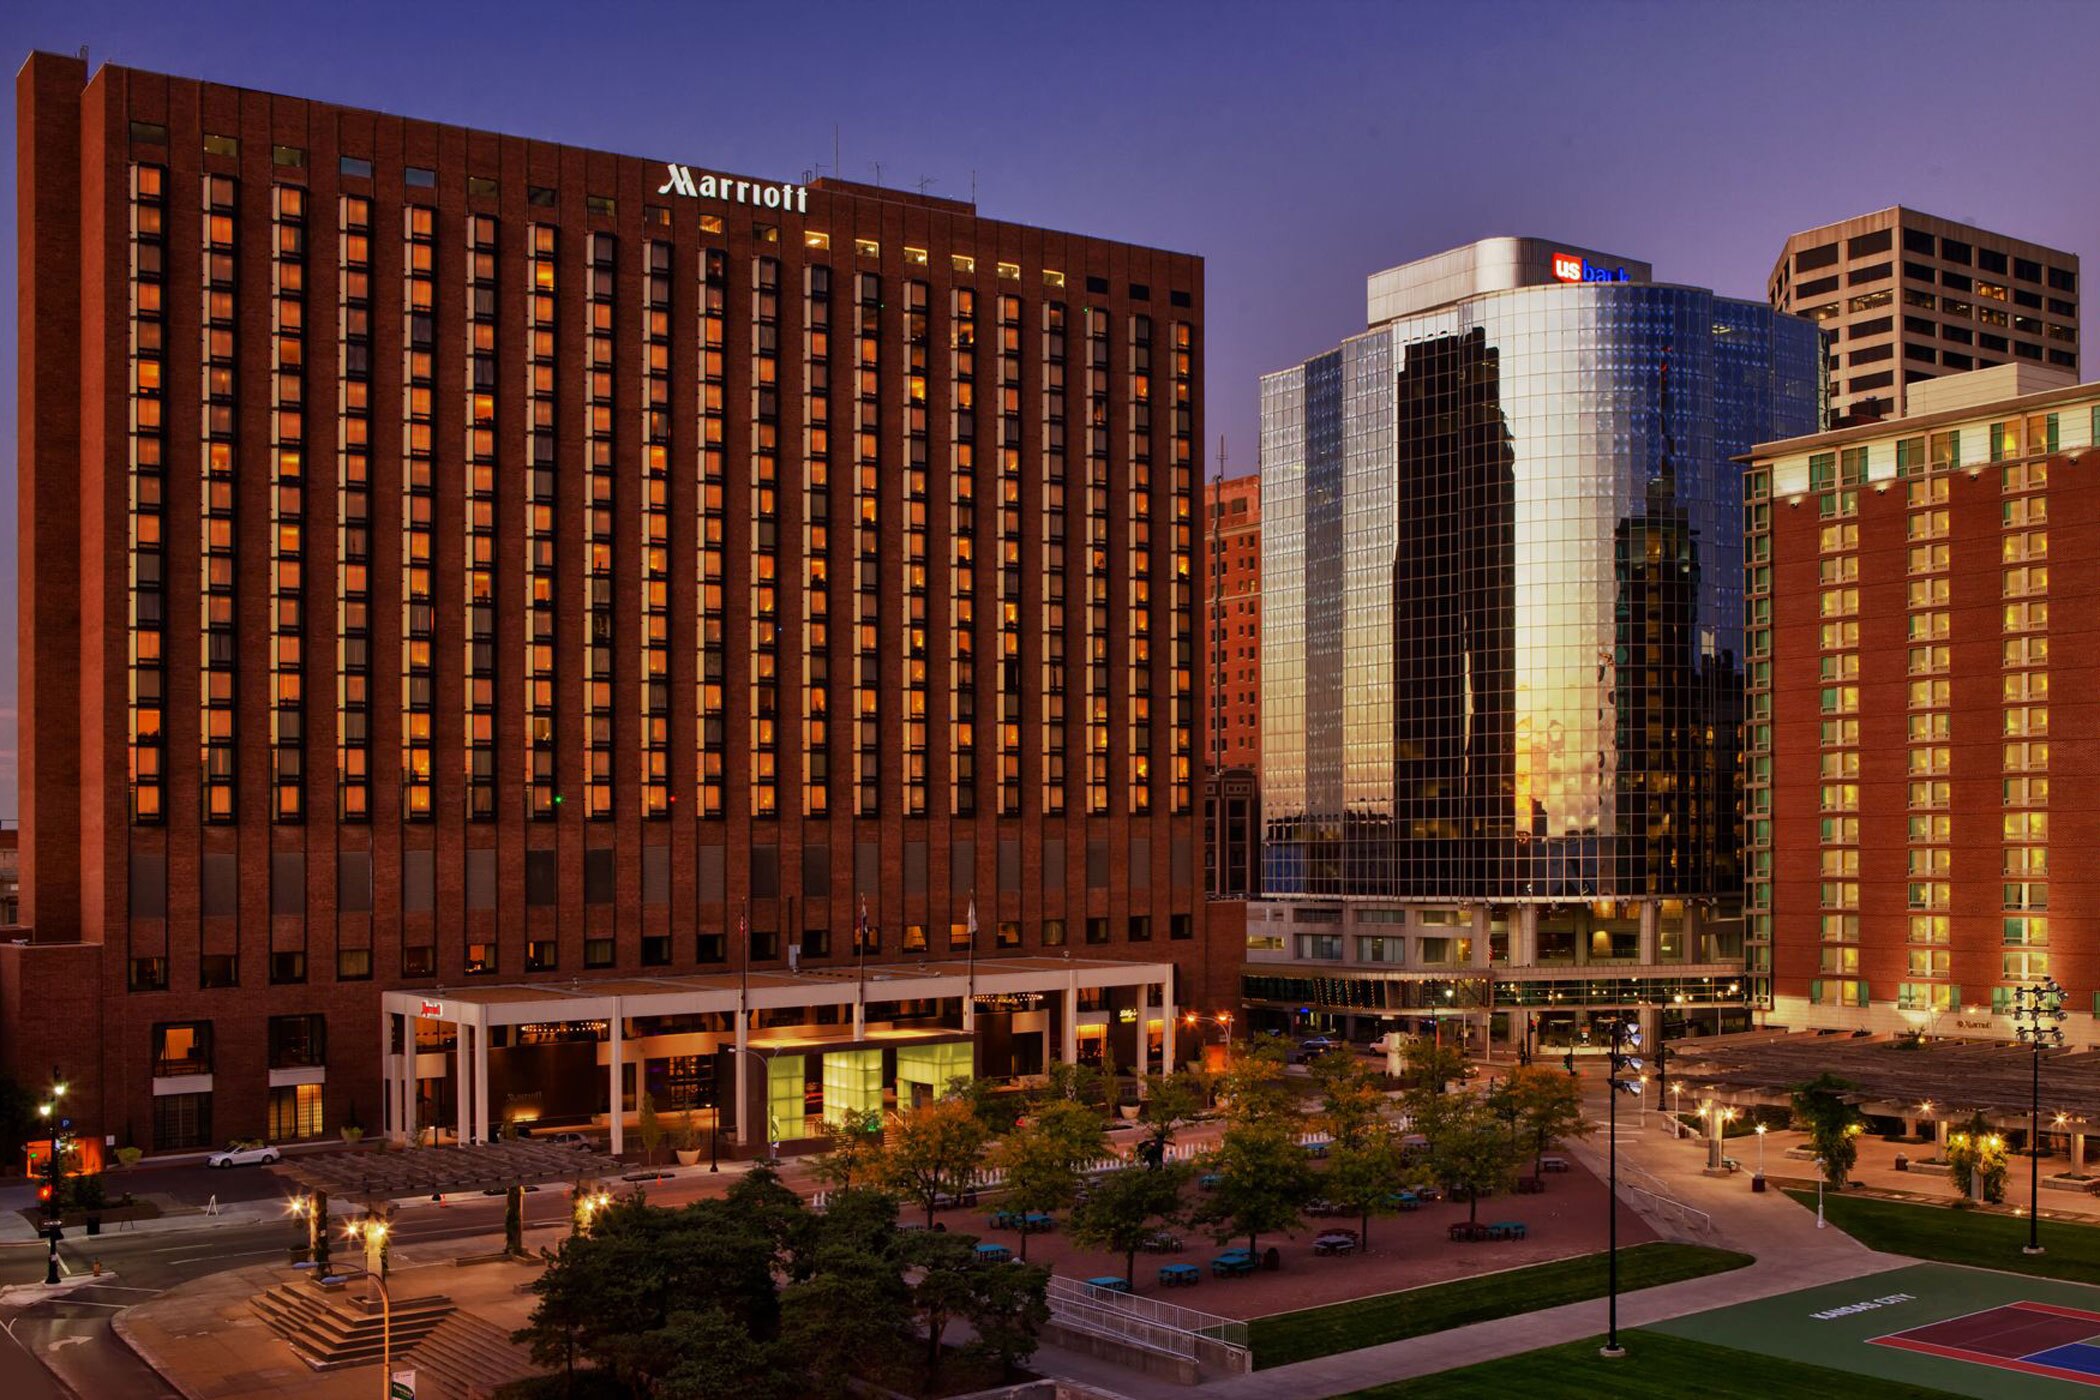 Properties such as the Aimbridge Hospitality-managed Marriott Kansas City Downtown need to have a symbiotic relationship with meeting planners in order to achieve success in working together. (Aimbridge Hospitality)